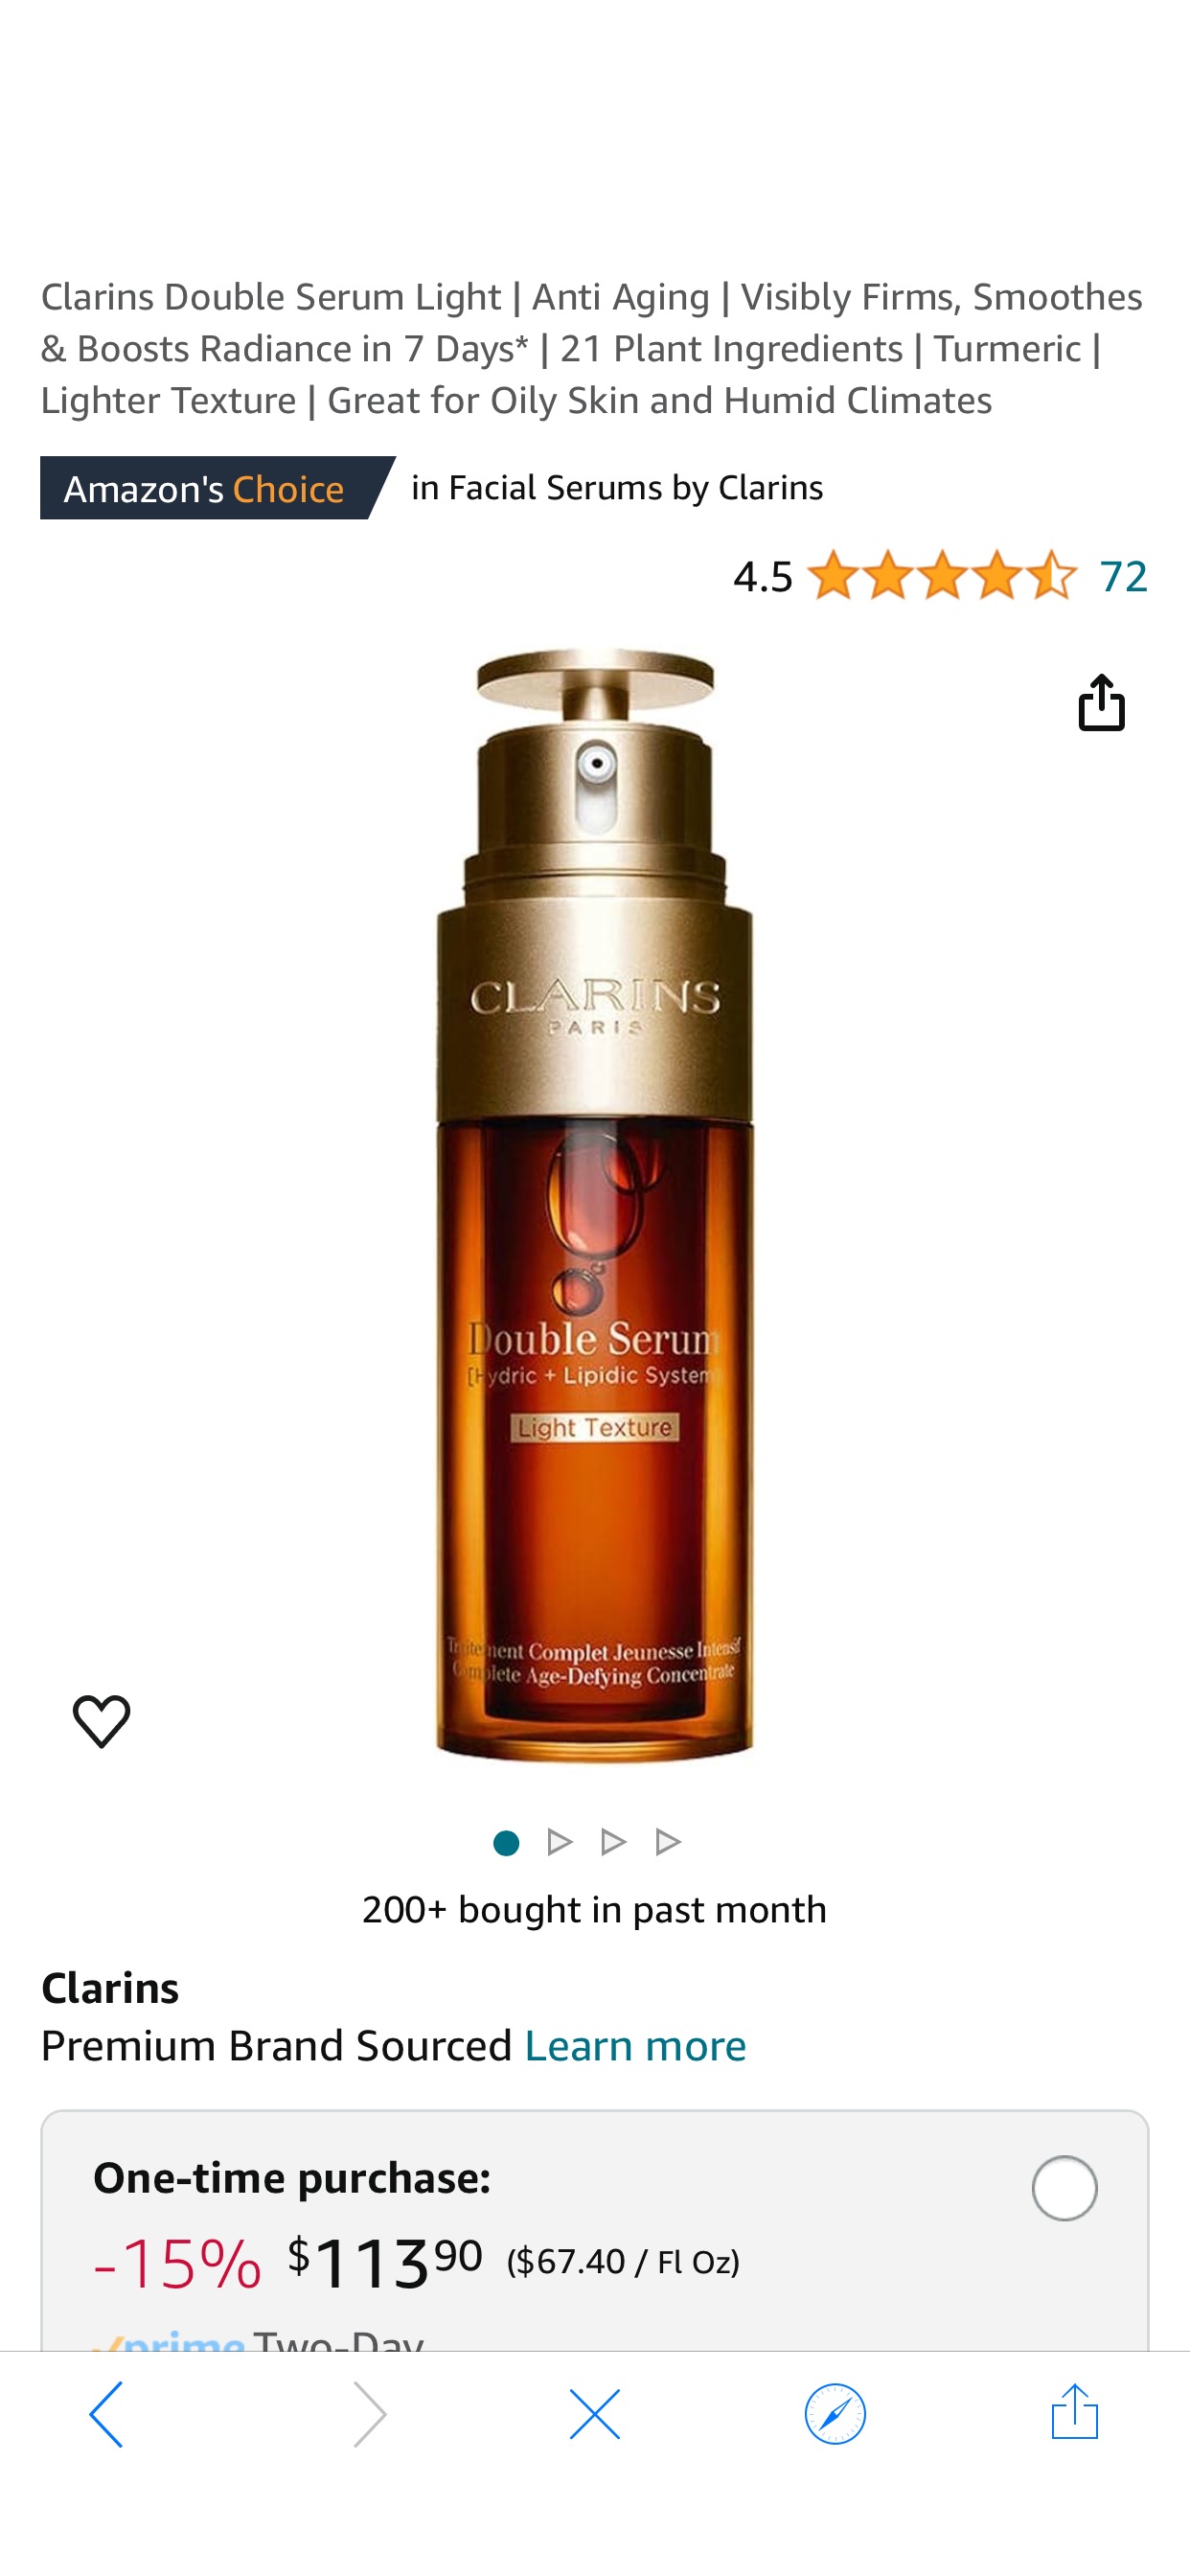 Amazon.com: Clarins Double Serum Light | Anti Aging | Visibly Firms, Smoothes & Boosts Radiance in 7 Days* | 21 Plant Ingredients | Turmeric | Lighter Texture | Great for Oily Skin and Humid Climates 